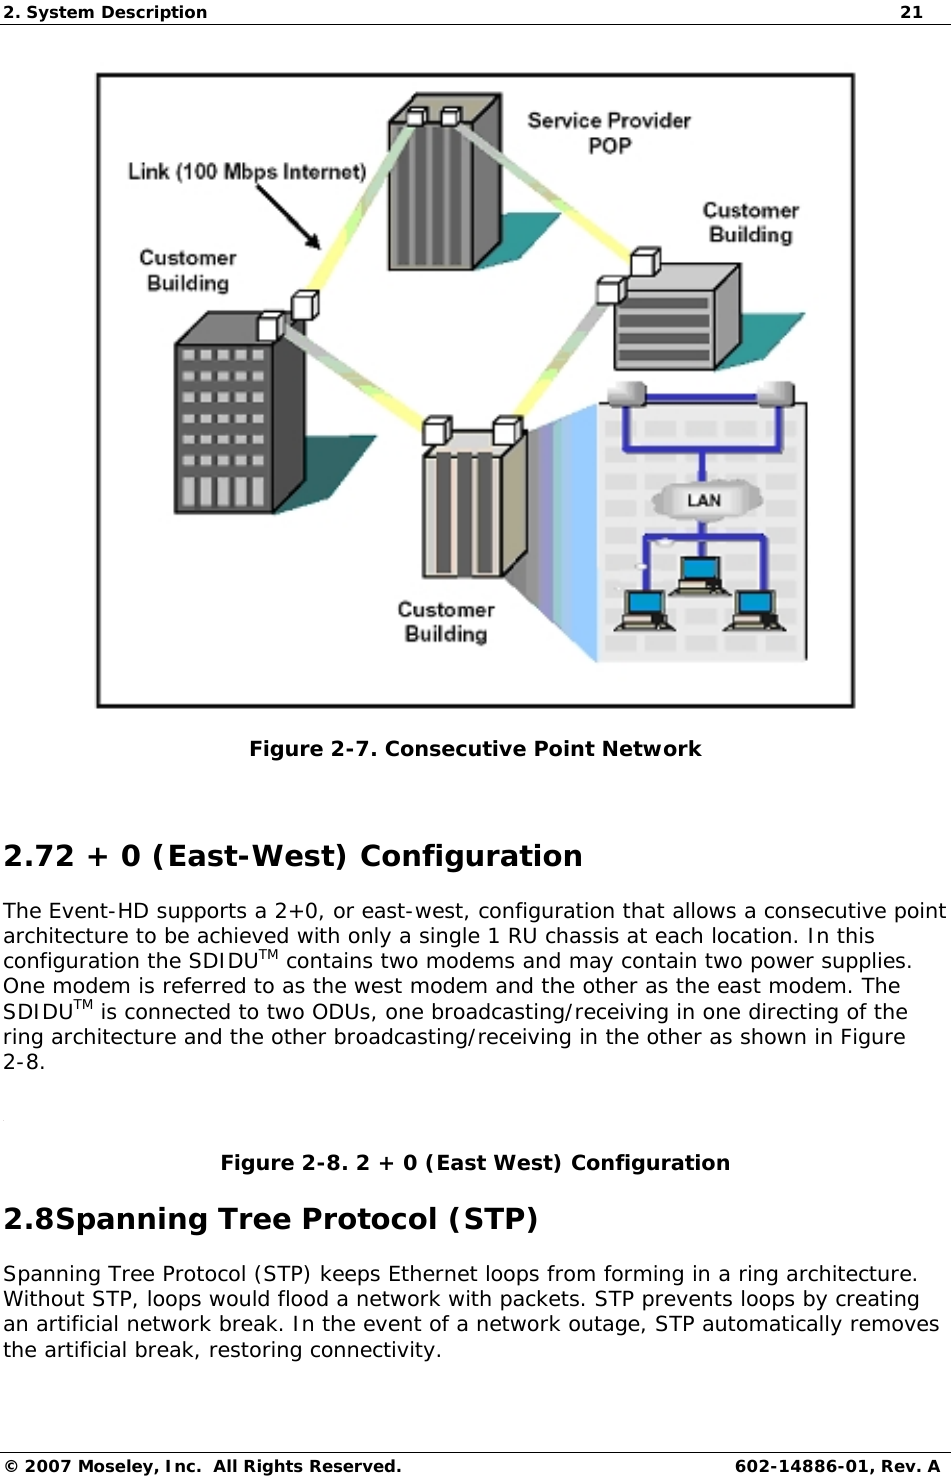 2. System Description  21 © 2007 Moseley, Inc.  All Rights Reserved. 602-14886-01, Rev. A  Figure 2-7. Consecutive Point Network  2.72 + 0 (East-West) Configuration  The Event-HD supports a 2+0, or east-west, configuration that allows a consecutive point architecture to be achieved with only a single 1 RU chassis at each location. In this configuration the SDIDUTM contains two modems and may contain two power supplies. One modem is referred to as the west modem and the other as the east modem. The SDIDUTM is connected to two ODUs, one broadcasting/receiving in one directing of the ring architecture and the other broadcasting/receiving in the other as shown in Figure 2-8.  Figure 2-8. 2 + 0 (East West) Configuration 2.8Spanning Tree Protocol (STP) Spanning Tree Protocol (STP) keeps Ethernet loops from forming in a ring architecture. Without STP, loops would flood a network with packets. STP prevents loops by creating an artificial network break. In the event of a network outage, STP automatically removes the artificial break, restoring connectivity. 